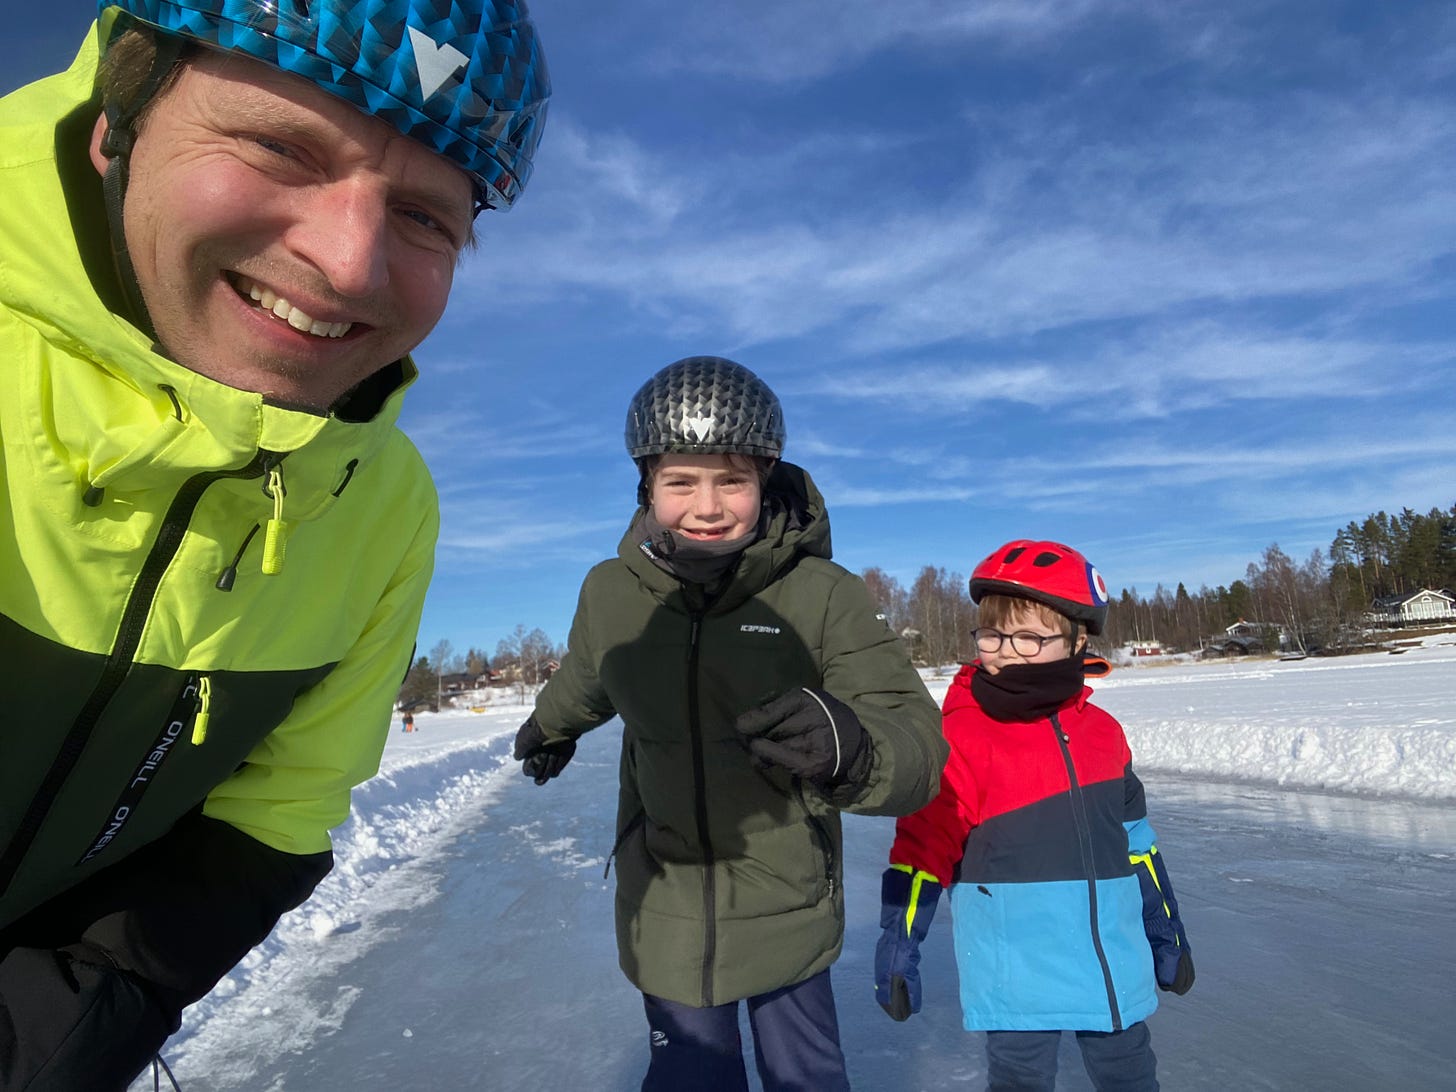 The author and his two sons on a frozen lake in Sweden, wearing helmets and snow jackets